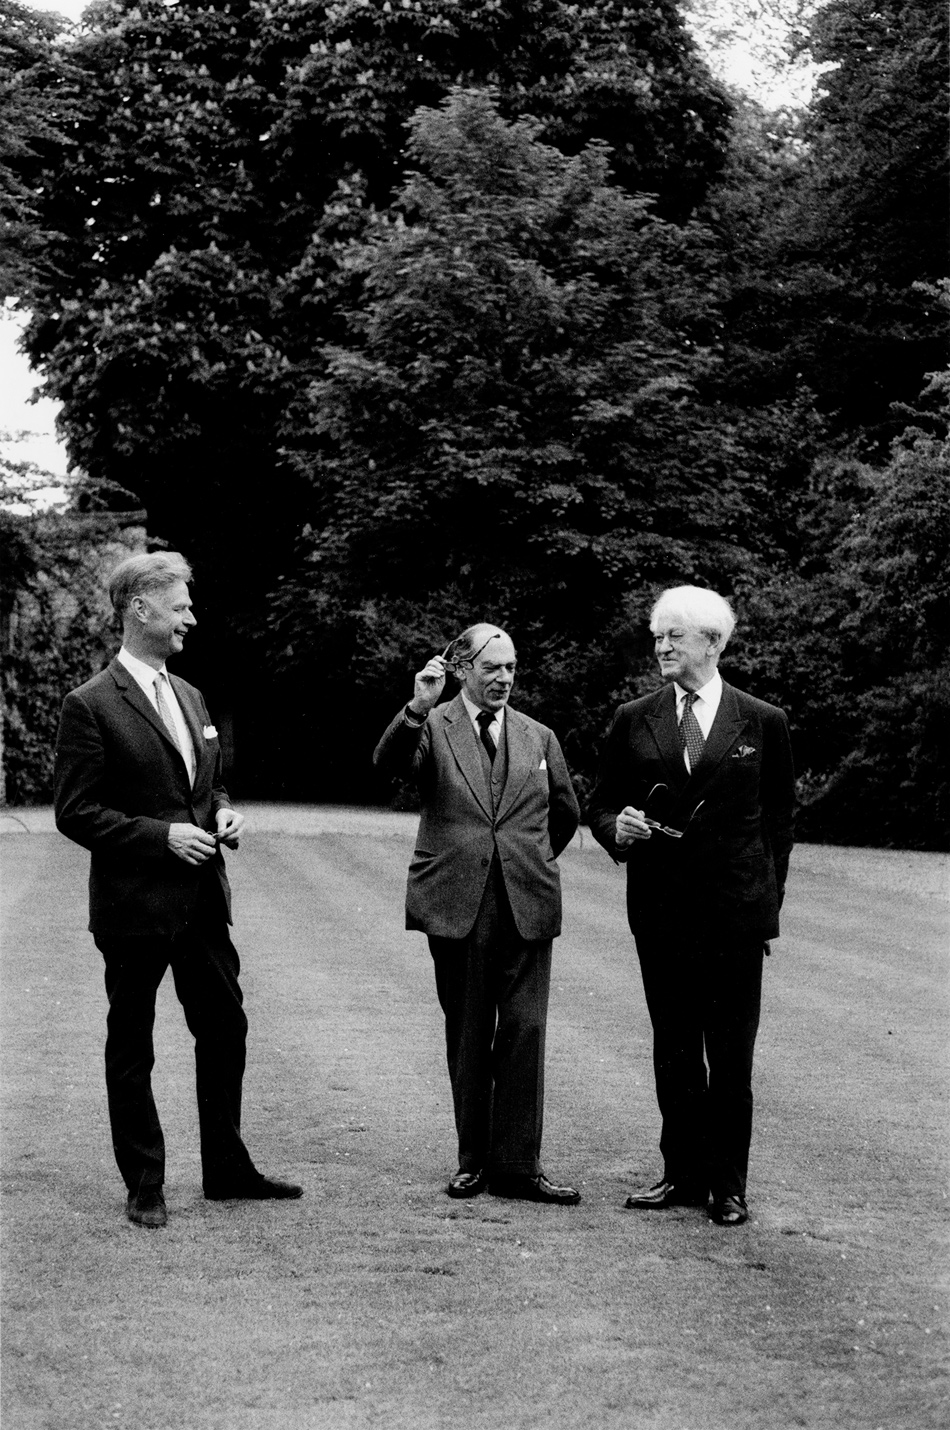 Isaiah Berlin (center) with his friends Stuart Hampshire and Nicolas Nabokov, 
Oxford, England, 1969